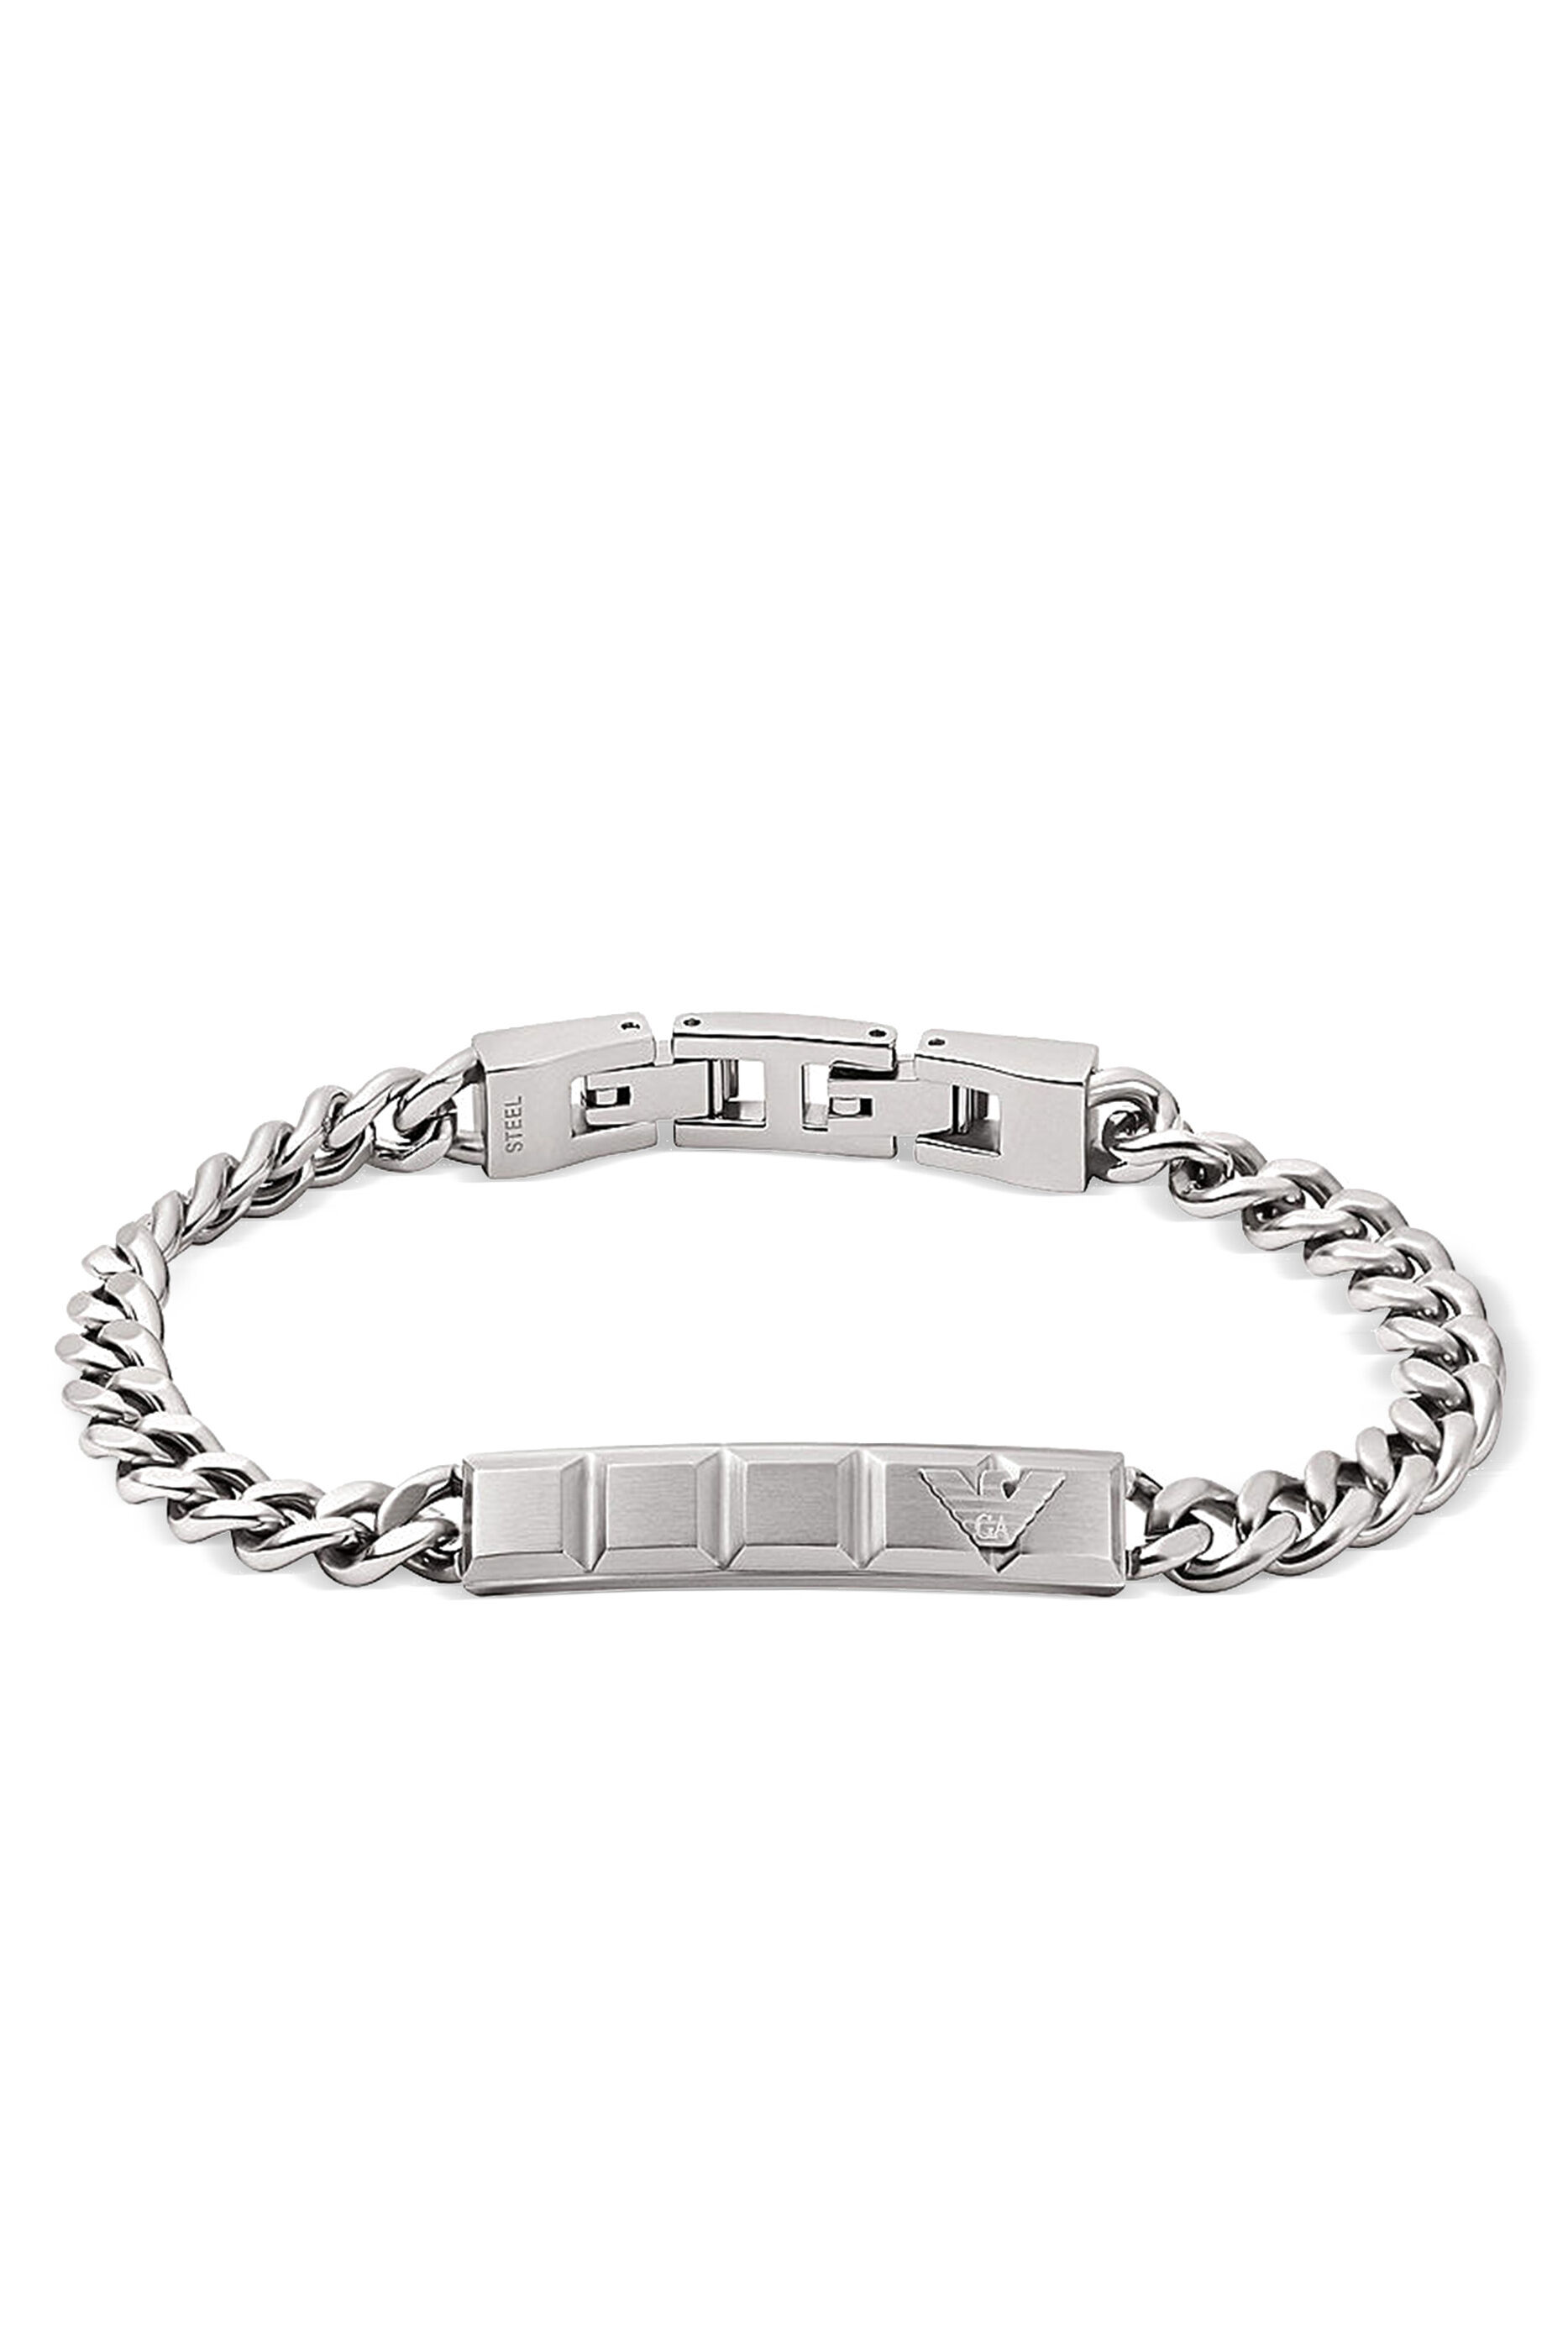 Buy Emporio Armani Chain Bracelet, Stainless Steel for Mens ...